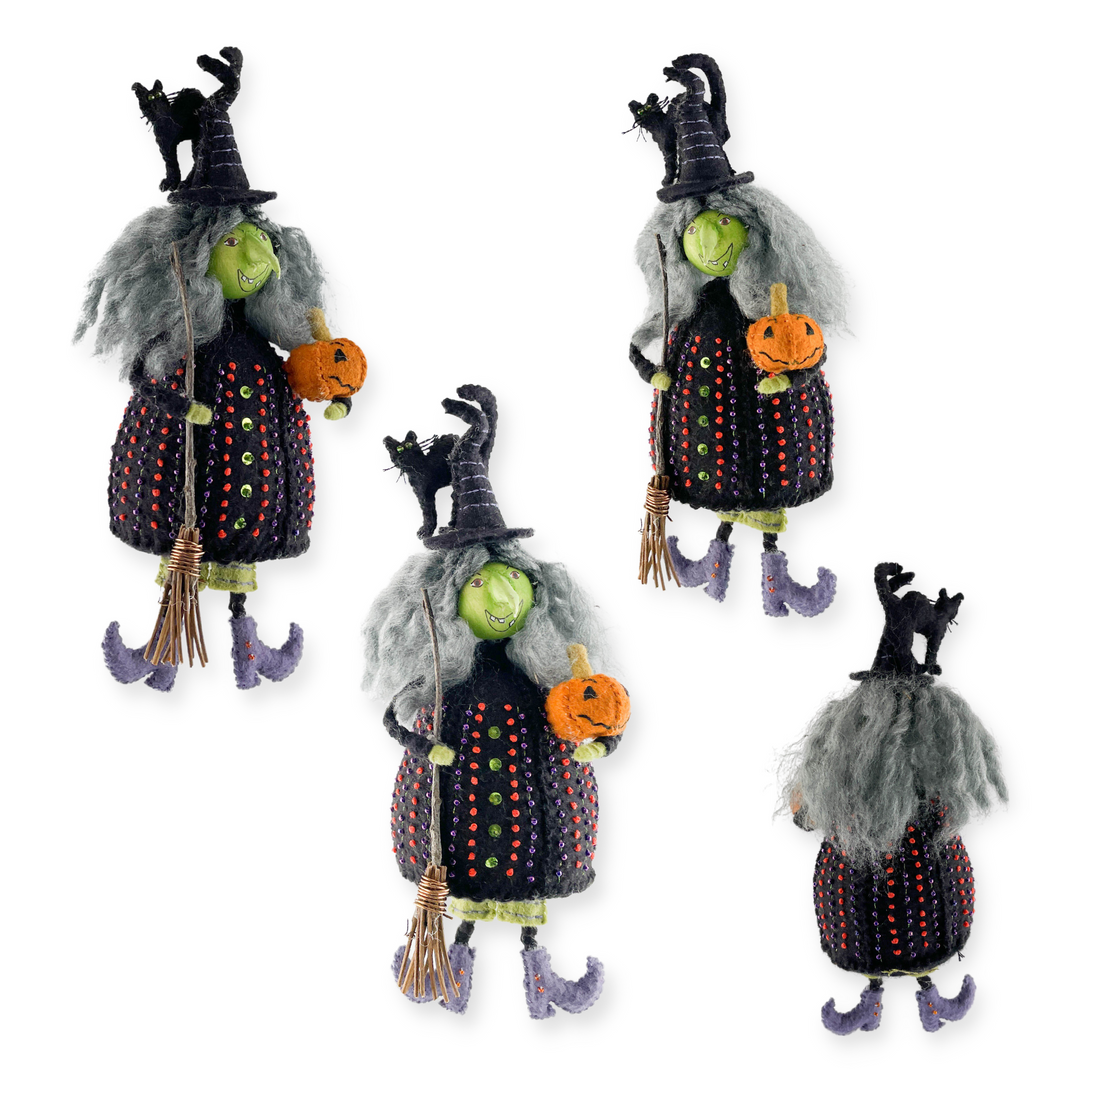 Whimsical Tabitha, a Halloween Witch E-Pattern and Instructions